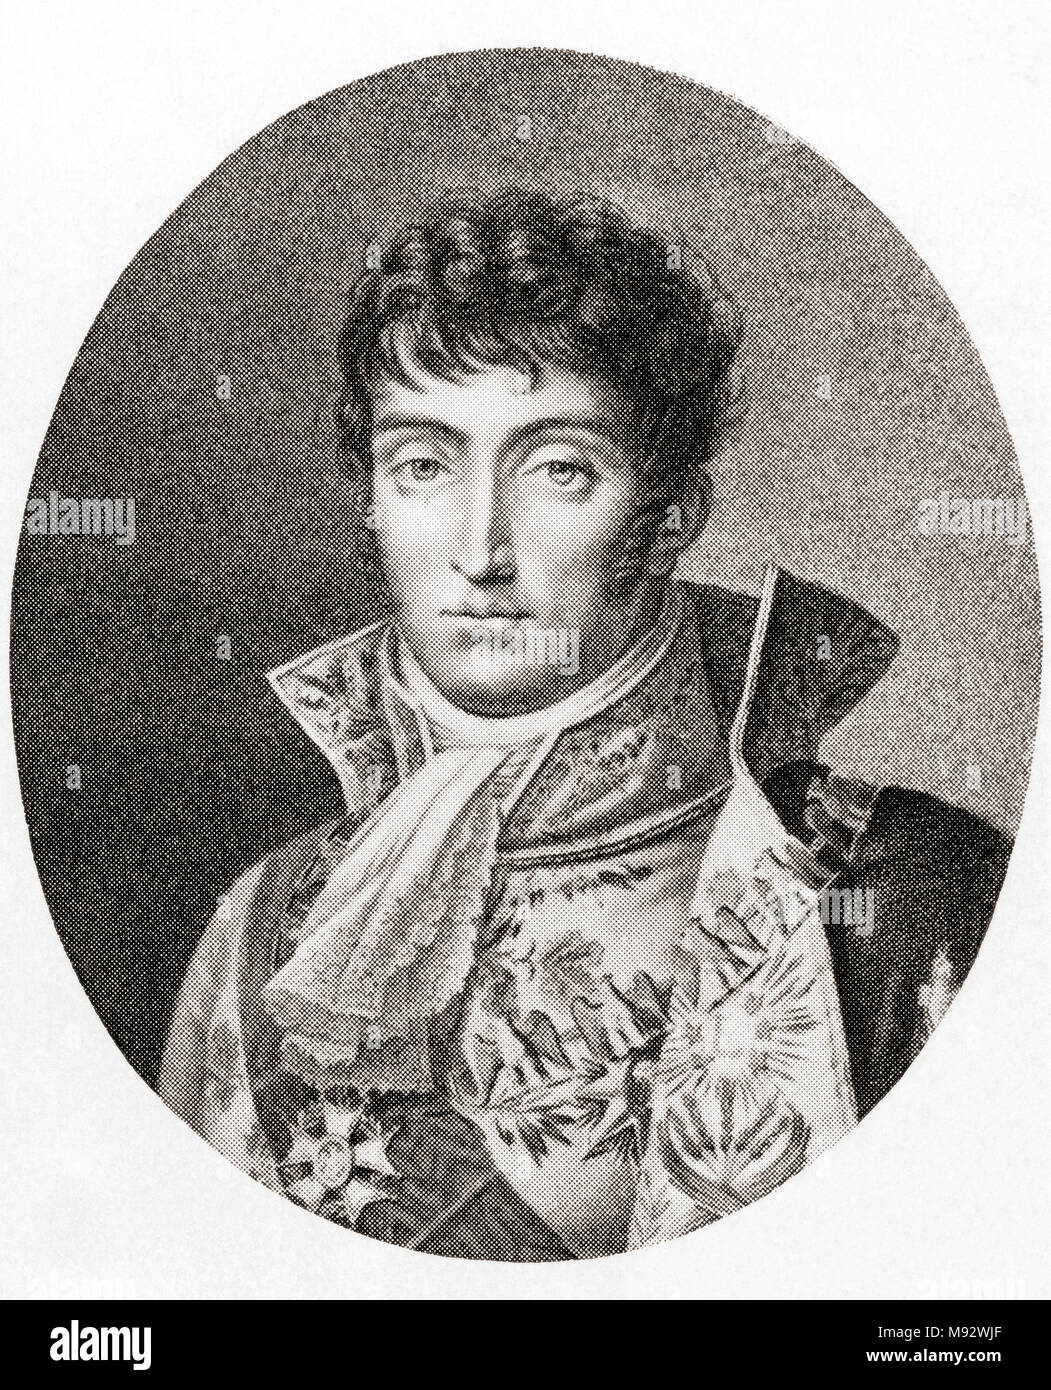 Louis Napoléon Bonaparte, 1778 –1846.  King of Holland, 1806 - 1810 and younger brother of Napoleon I, Emperor of the French.  From Hutchinson's History of the Nations, published 1915 Stock Photo